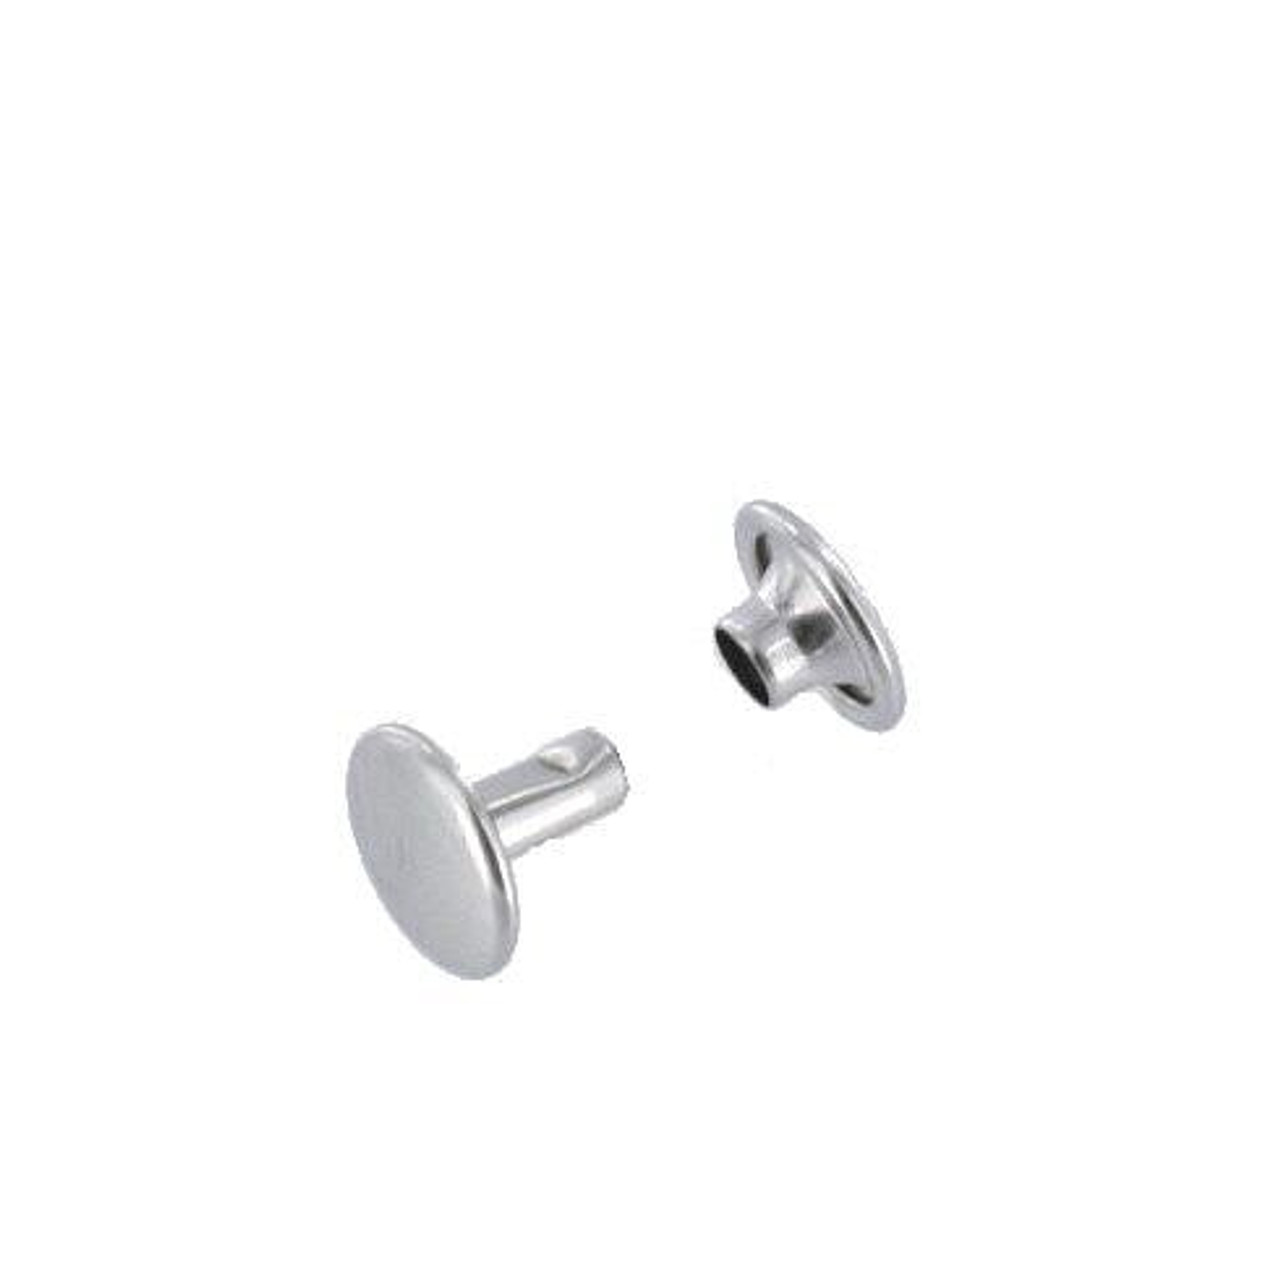 Double Cap Rivet Steel Nickle Plated For Leather And Fabric 4mm-12mm $0.06  - Wholesale China Double Cap Rivet at factory prices from Huizhou ZeYao  Hardware Products Co.,Ltd.